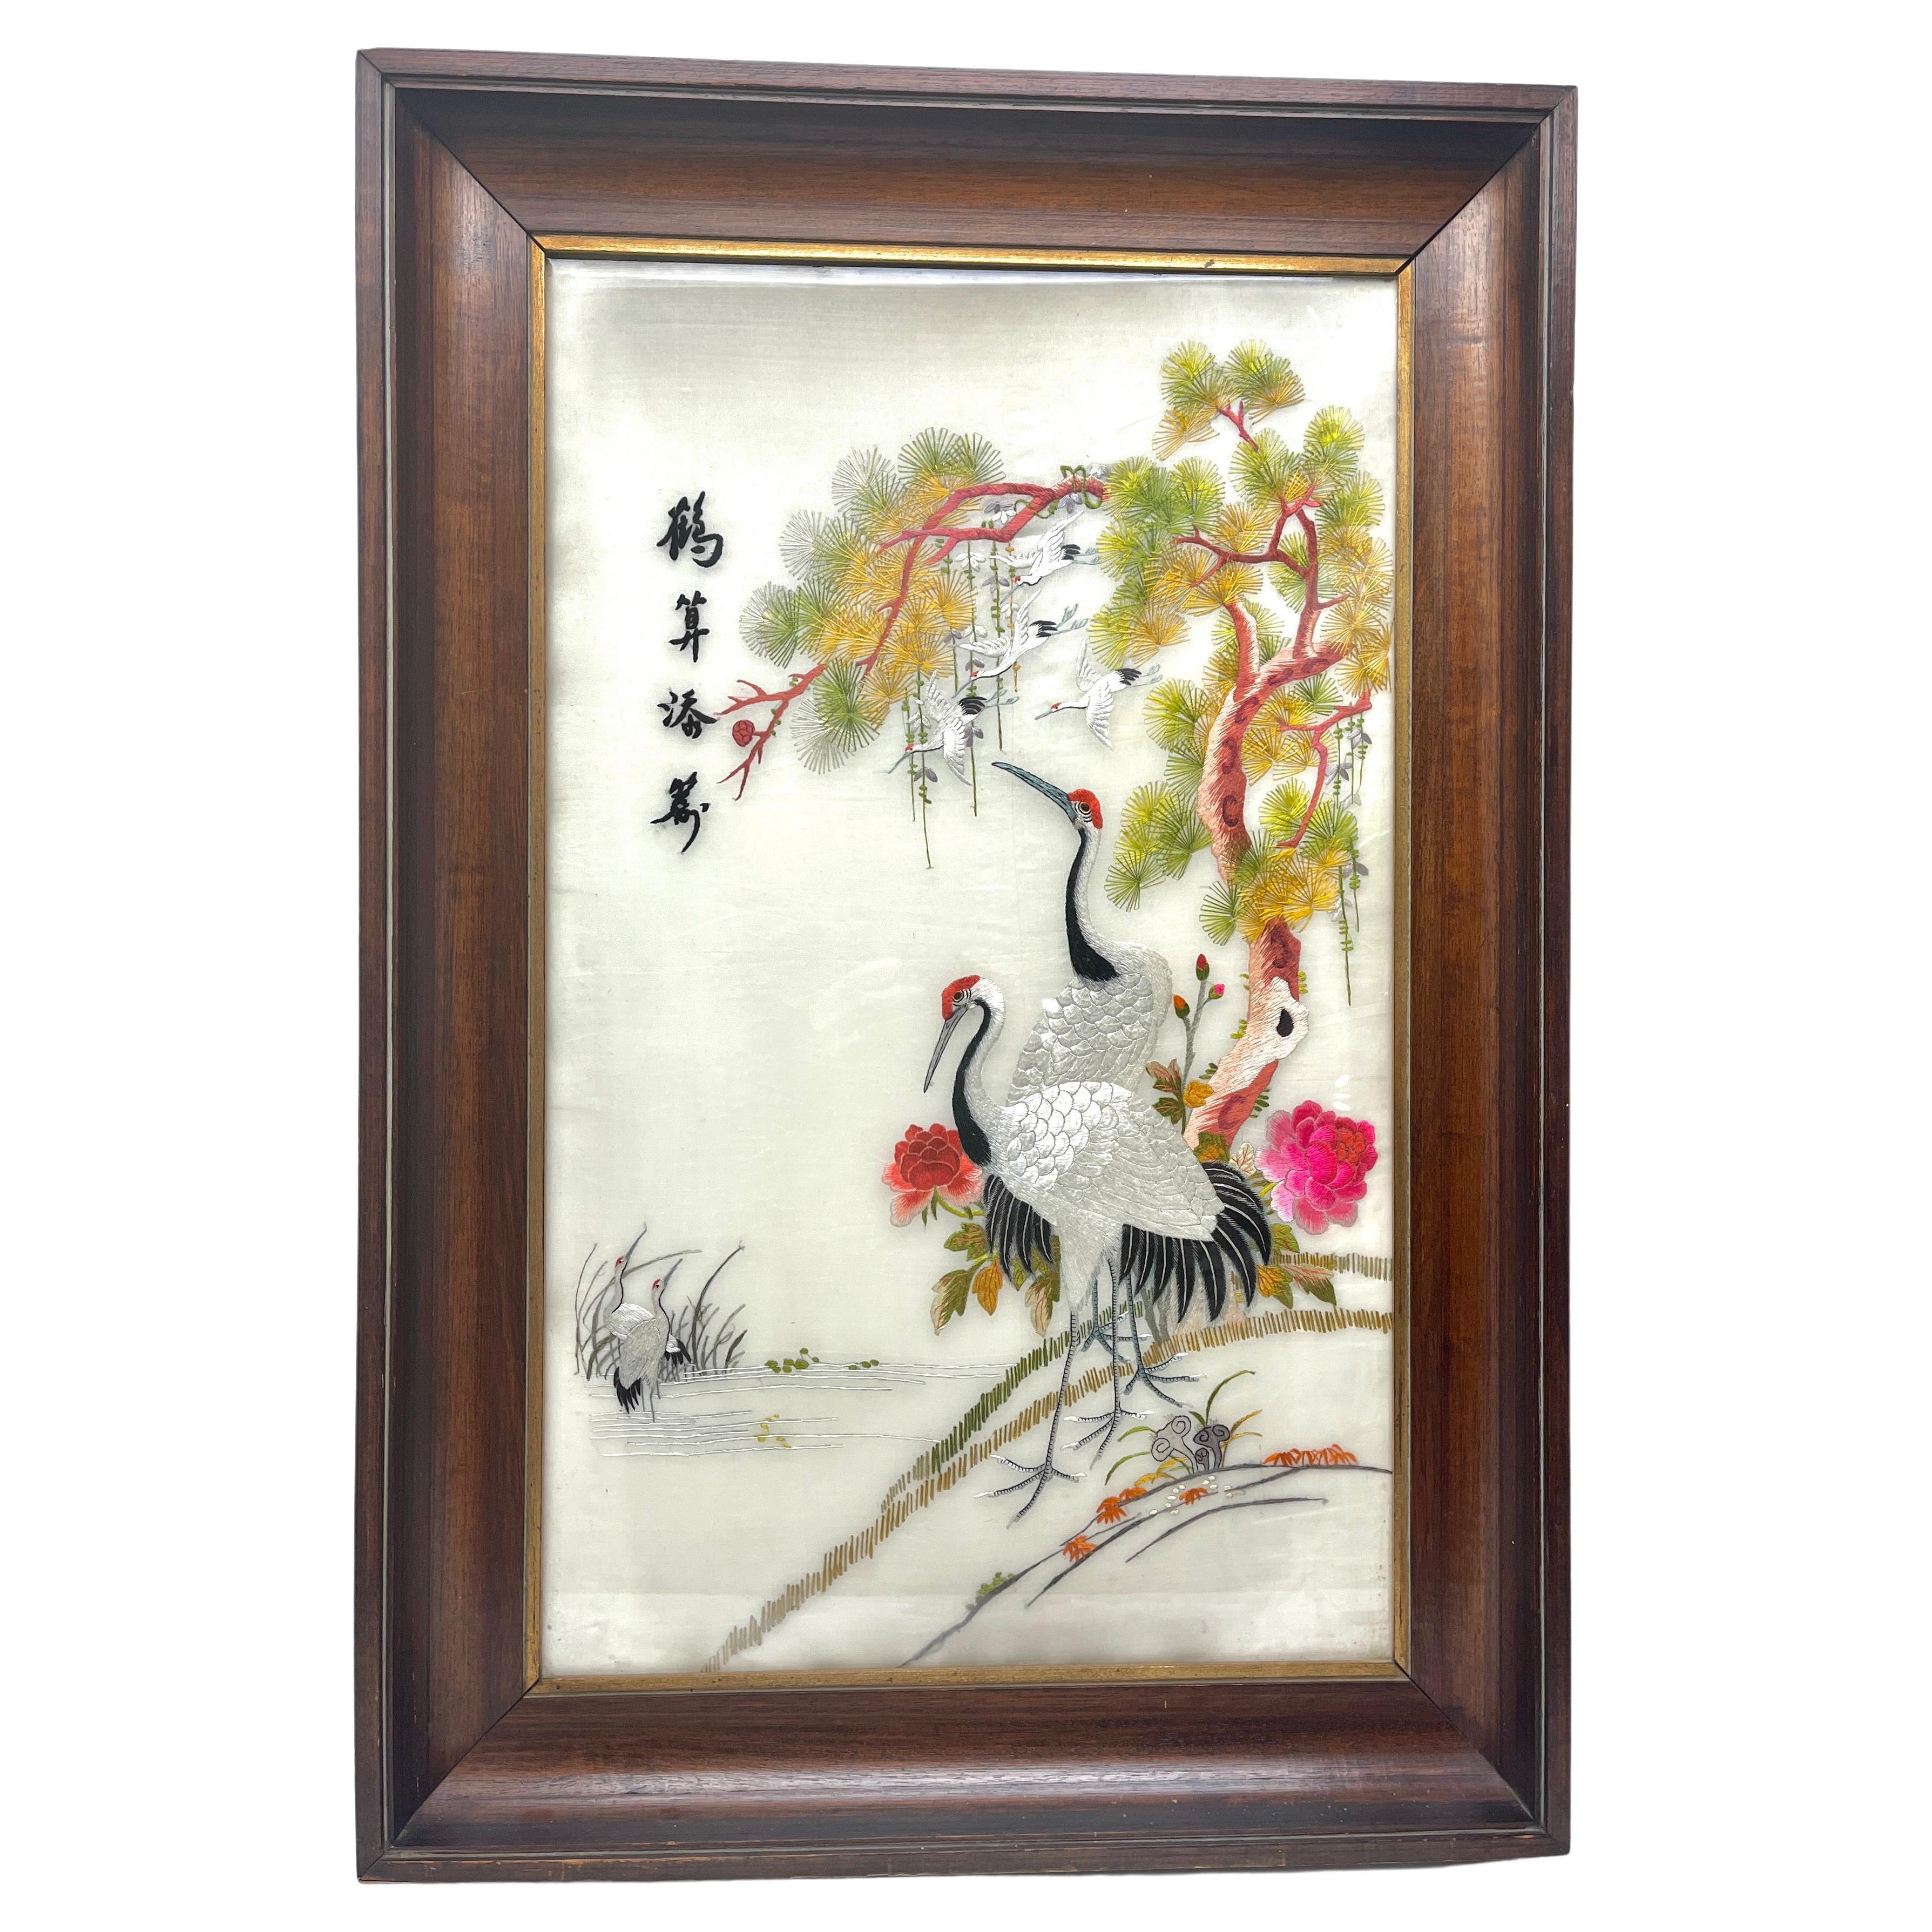 Silk Embroidered Pictures Depicts a Pair of Crane Birds in an Outdoor Setting For Sale